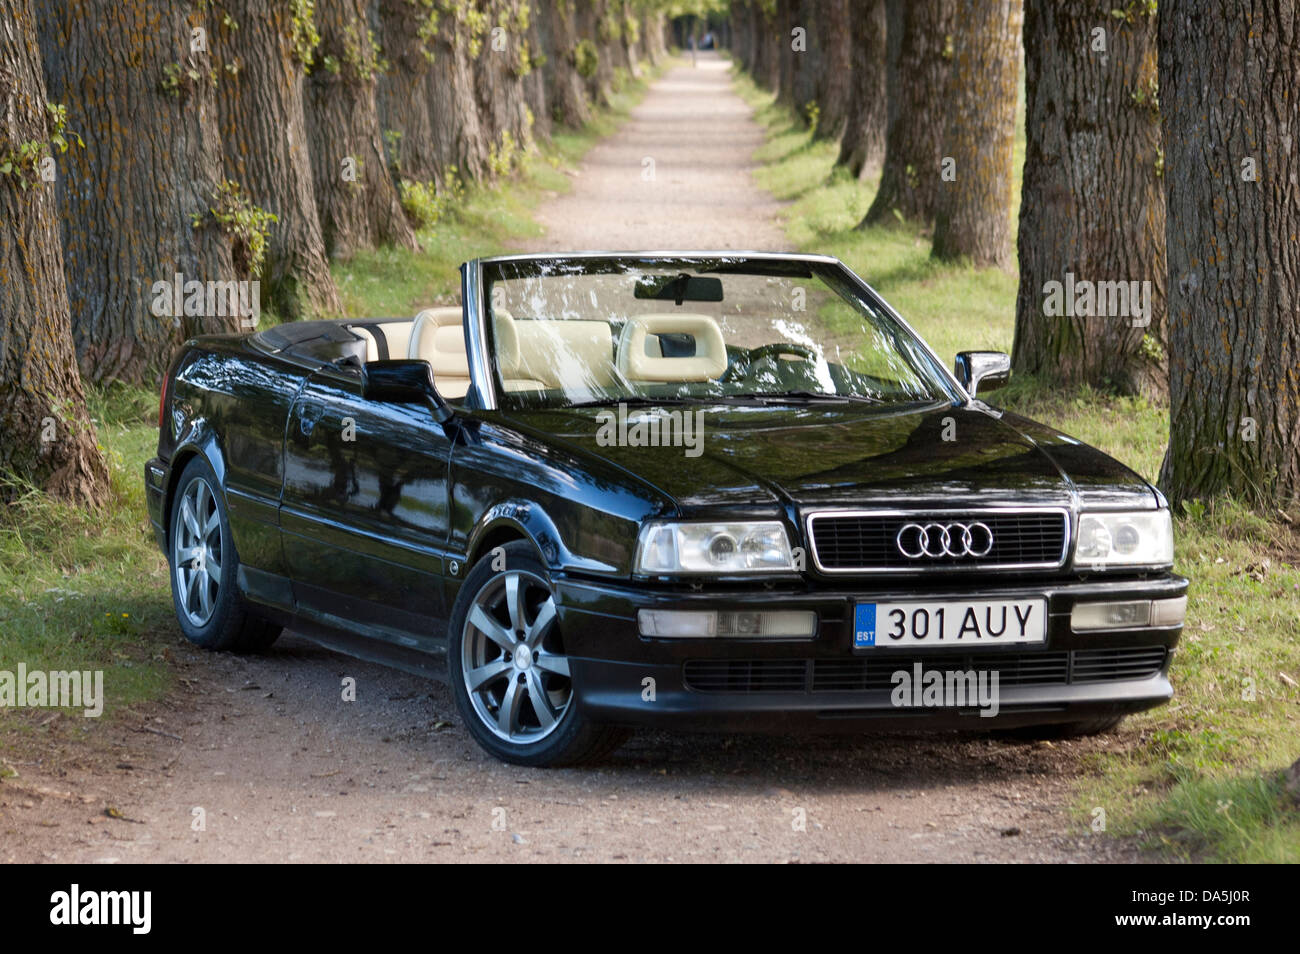 A classical Audi Cabrio parking in an alleyway Stock Photo - Alamy